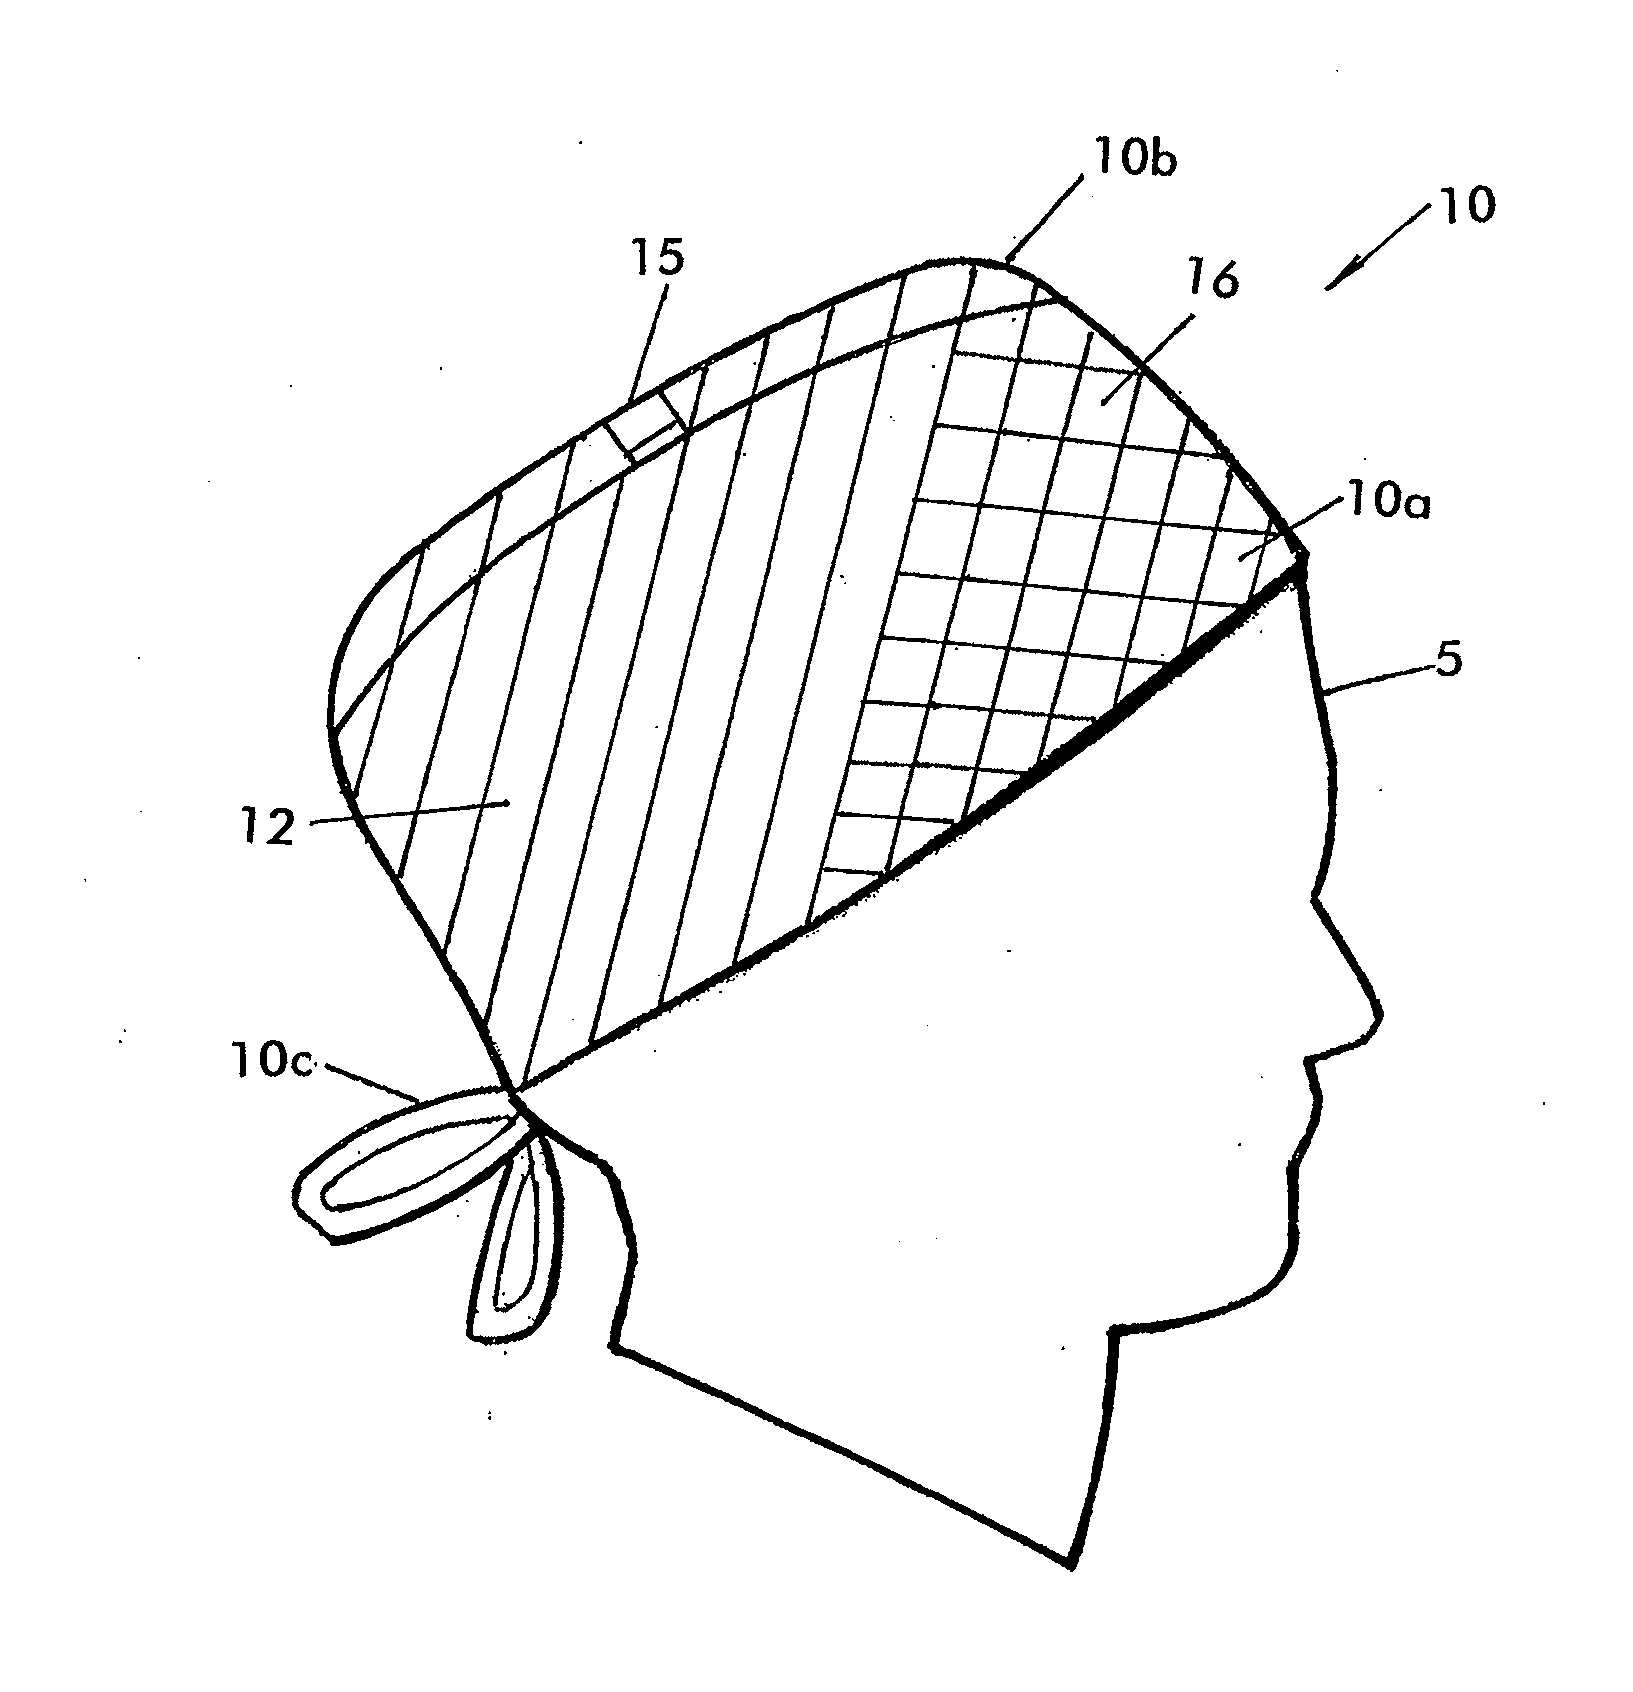 Shielded head cover with varying attenuation portions